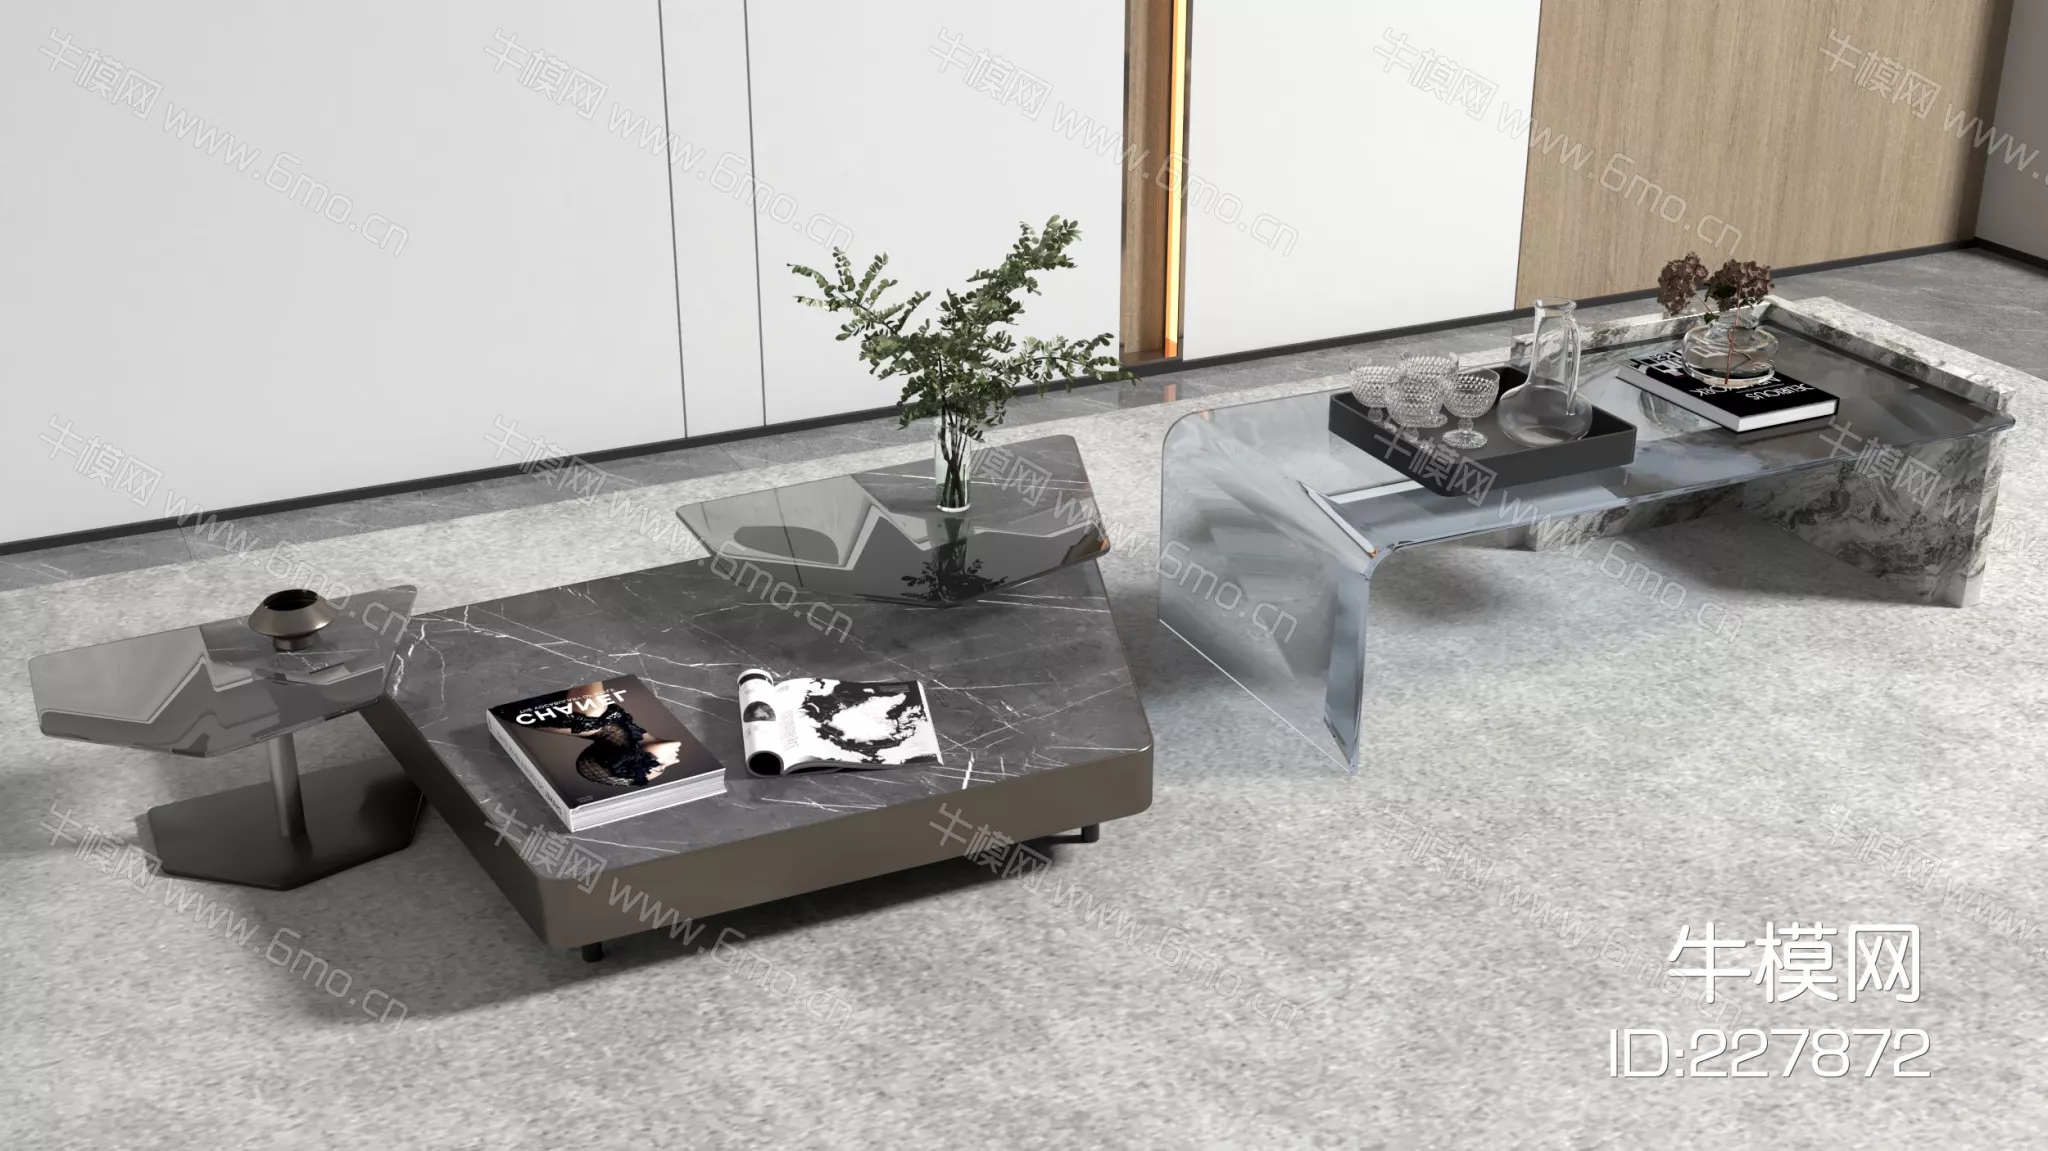 MODERN COFFEE TABLE - SKETCHUP 3D MODEL - VRAY - 227872